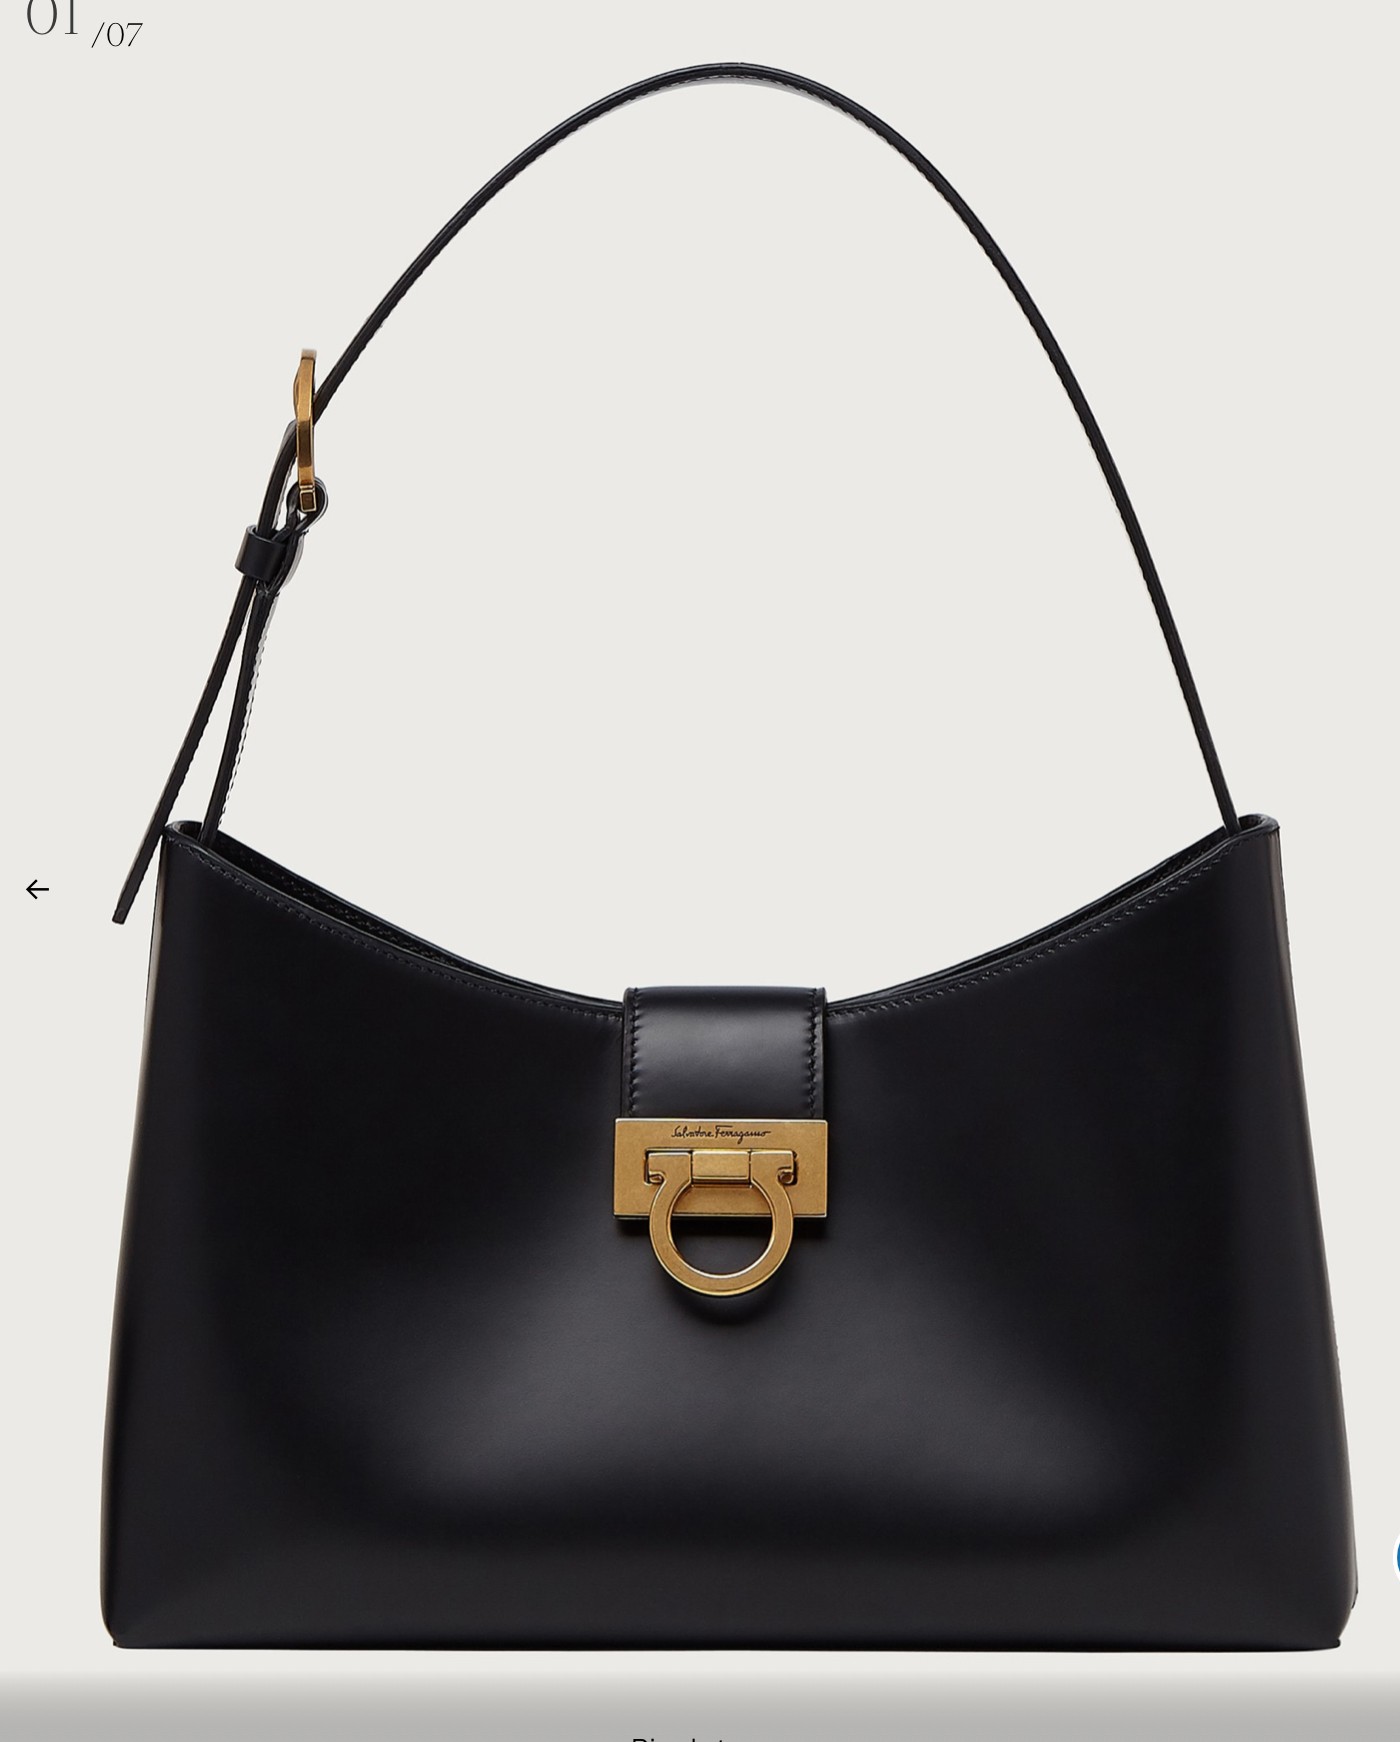 The Ageless Prada Cleo Bag Is Not Beholden To Time